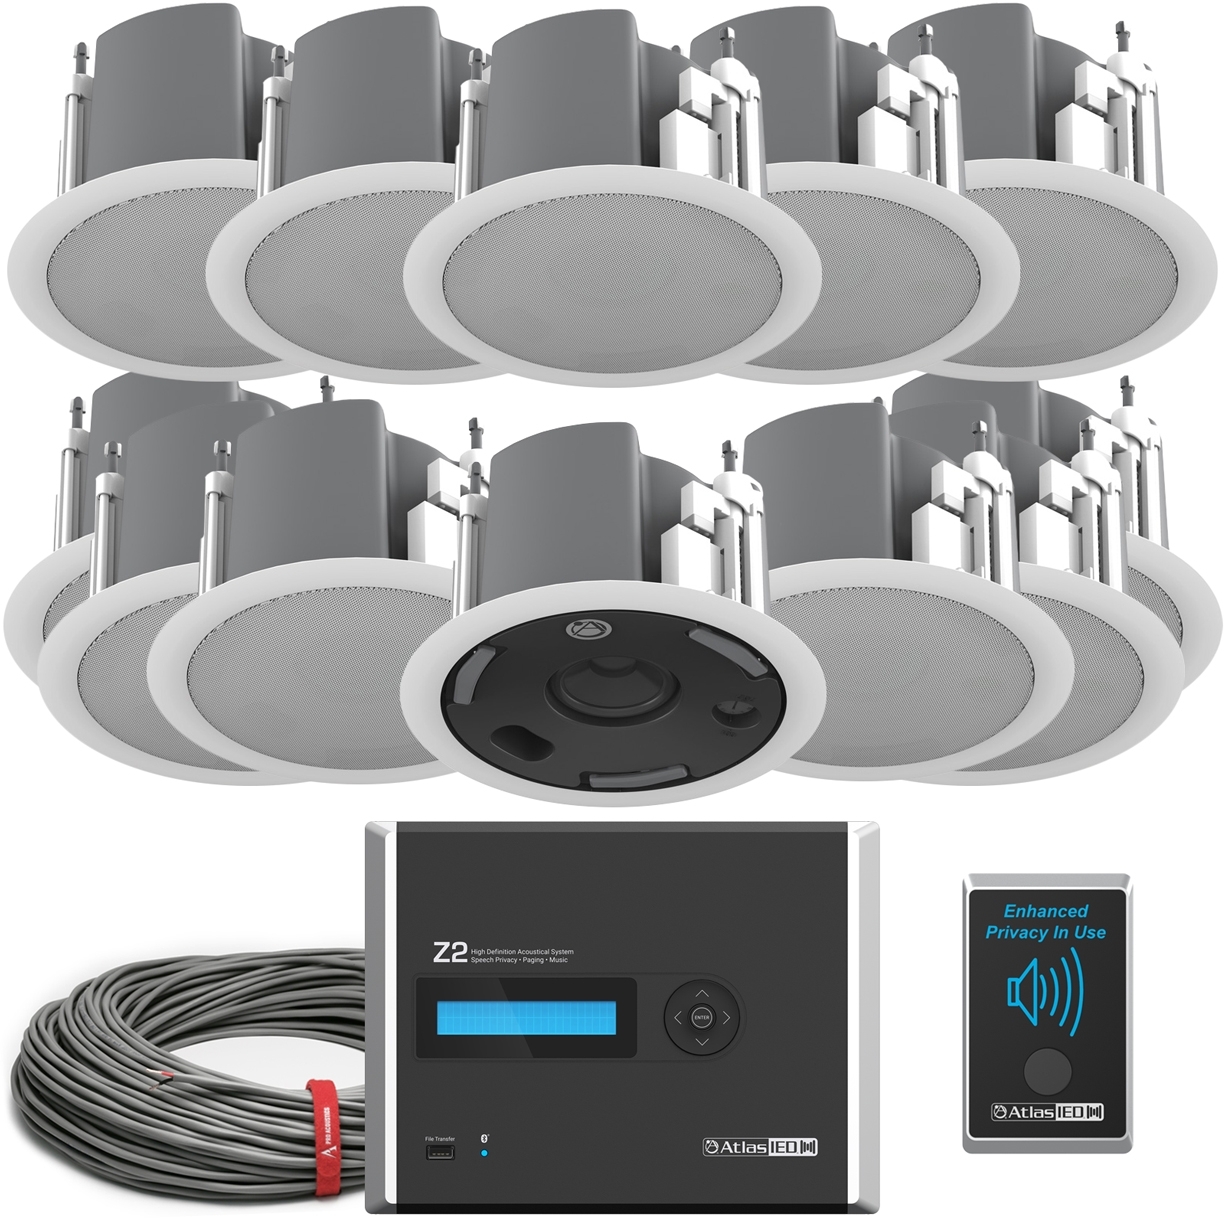  Sound Masking System with Atlas Sound In-Ceiling Speakers and Z Series Controller for up to 4000SF with Bluetooth